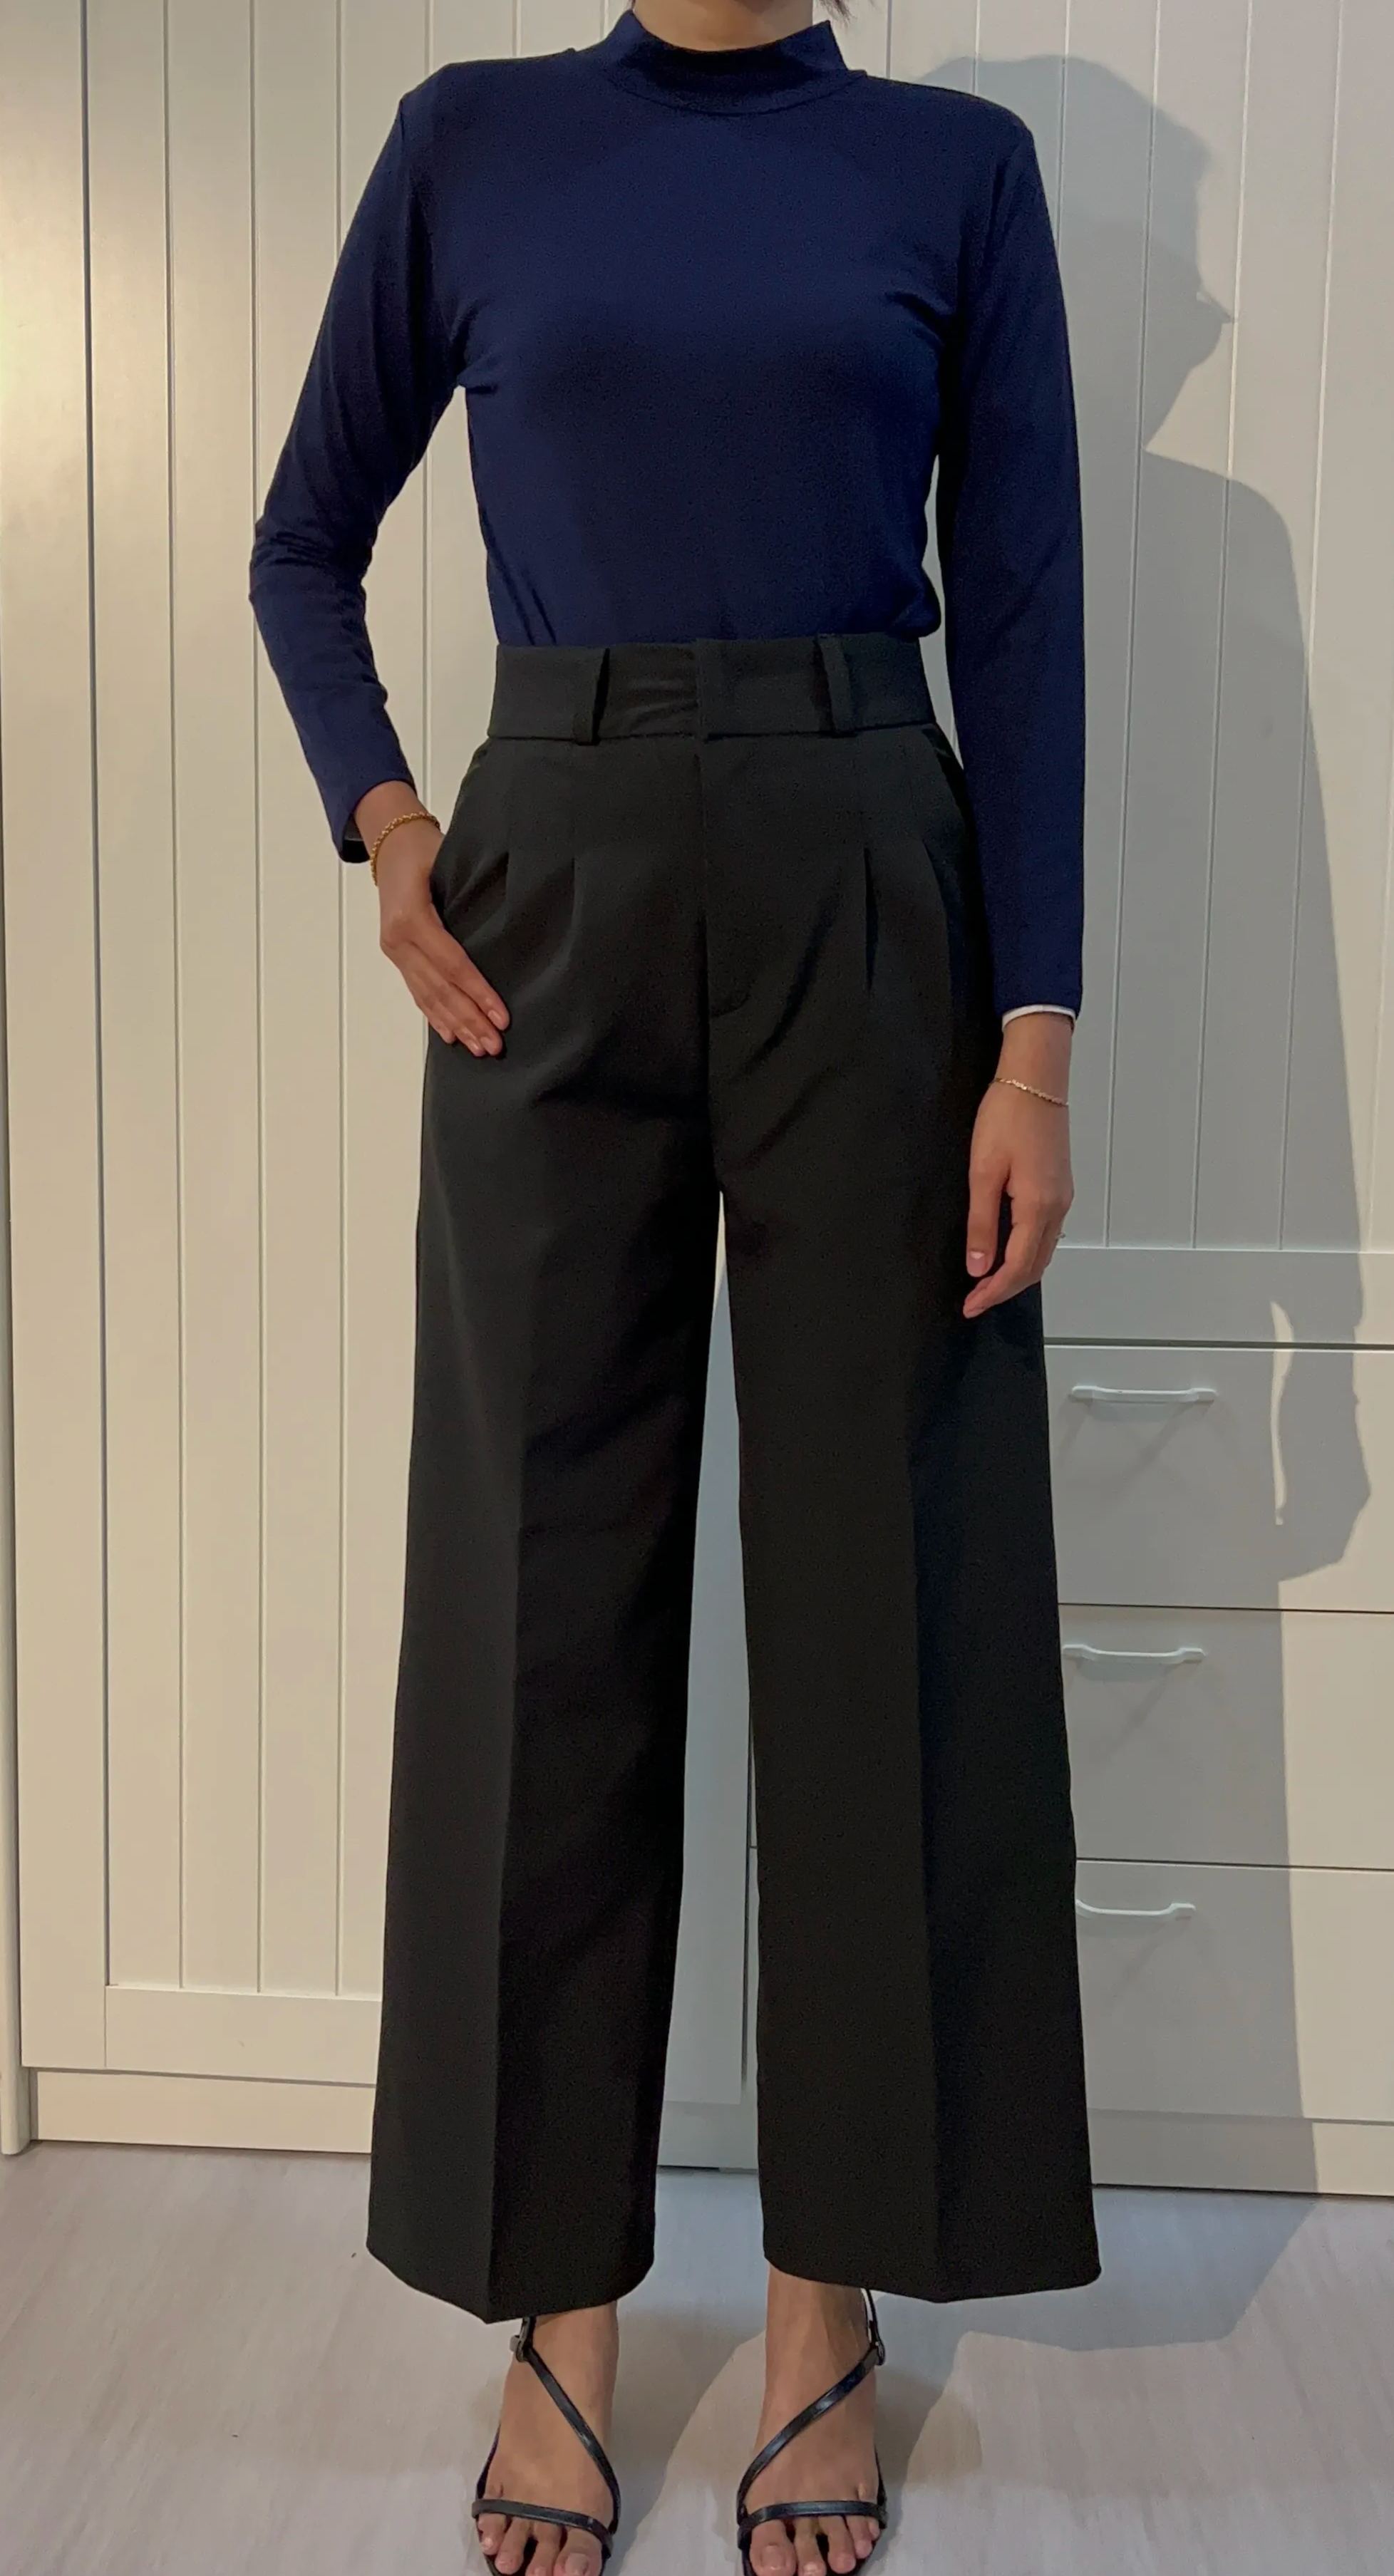 High Waisted Belted Trousers in White – KLARRA